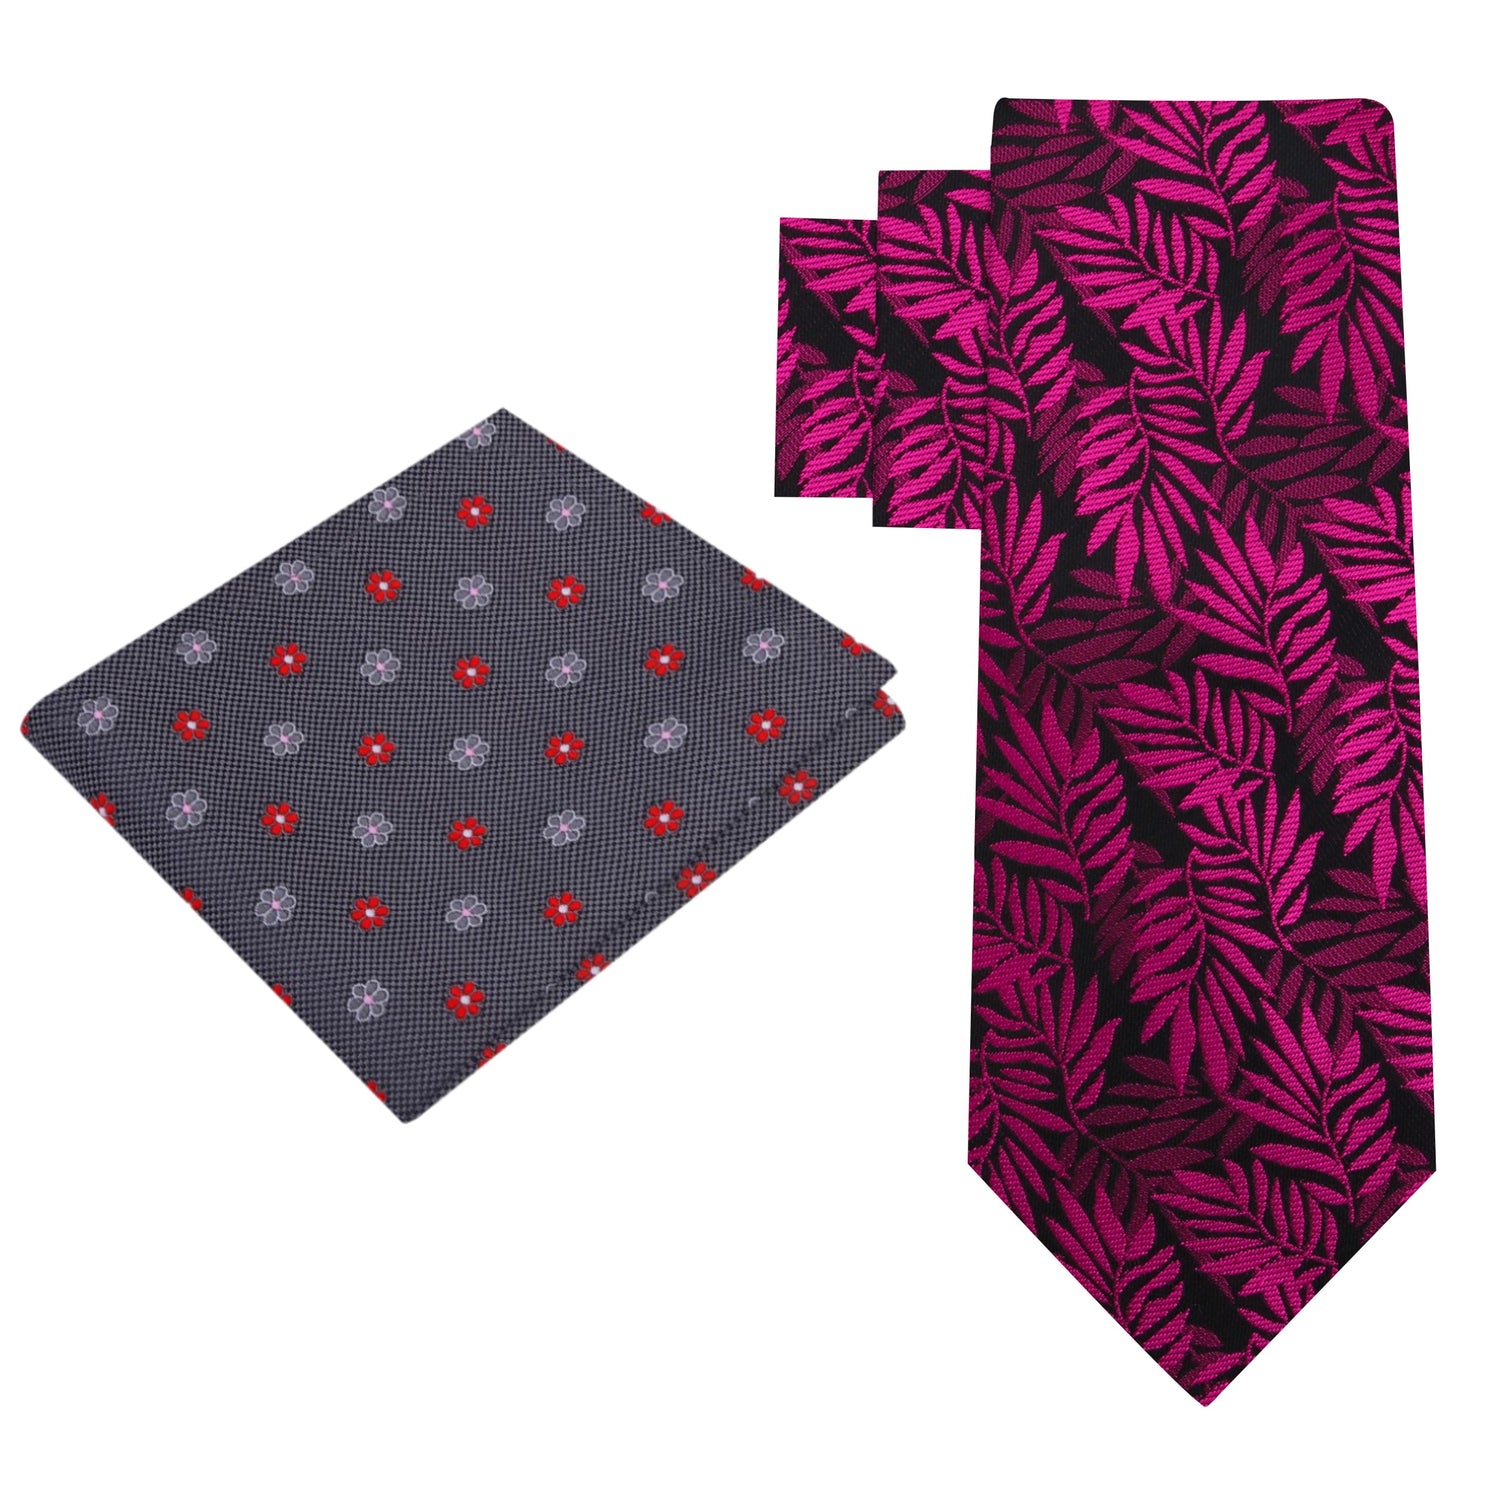 Alt View: Black with Reddish Pink Leaves Necktie and Grey, Red and Pink Small Flowers Square